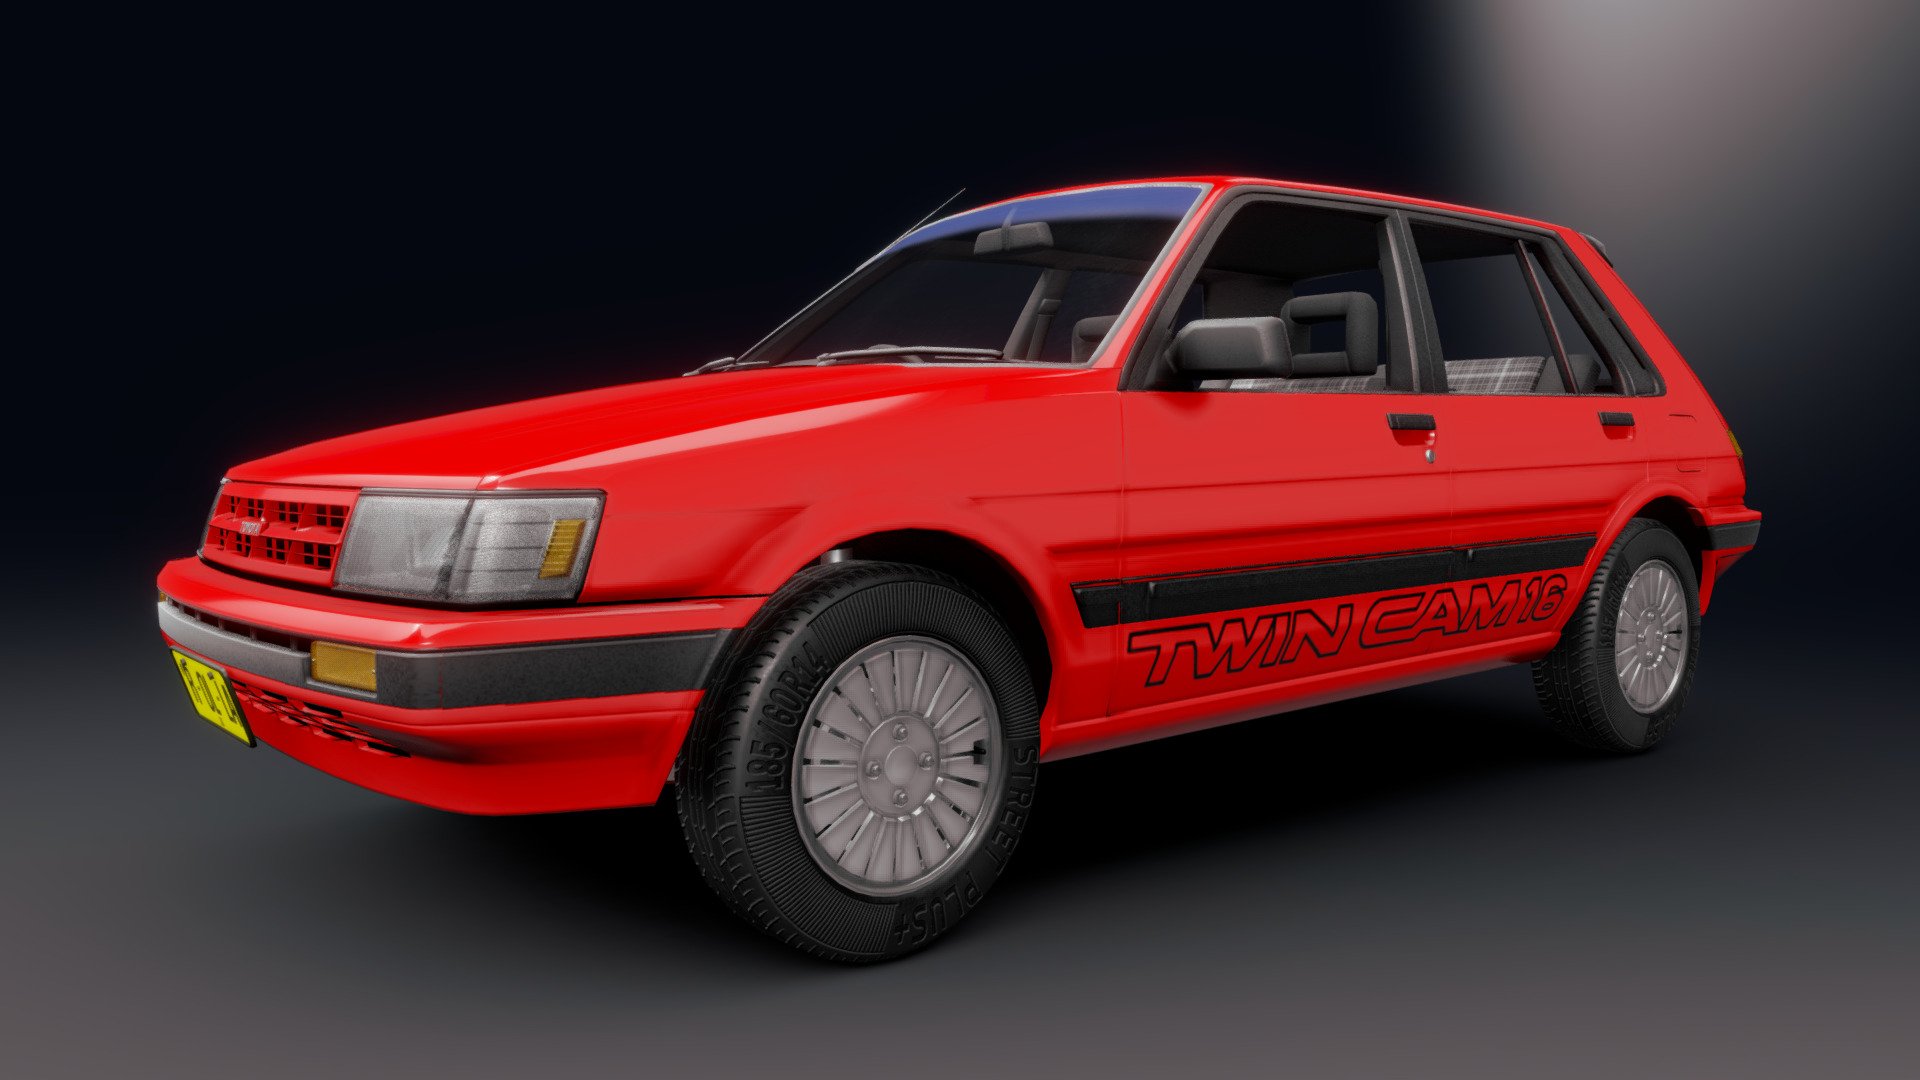 A different sporty Toyota from the mid 80s.



AE82 Chassis hatchback variant with the Series 3 front end.

**A mid-poly model with a detailed interior and underbody.
**

** BODY ALONE - 14,829 VERTS, 29,012 EDGES, 14.228 FACES
** 

**INTERIOR - 11,876 VERTS, 23,180 EDGES, 11,399 FACES
**

**CHASSIS - 3,931 VERTS, 7,492 EDGES, 3,598 FACES
**

TOTAL - 48,212 VERTS, 94,606 EDGES, 46,605 FACES - Toyota Corolla Hatchback 5dr TWINCAM (AE82) - Buy Royalty Free 3D model by MGR '99 (@MGR99) 3d model